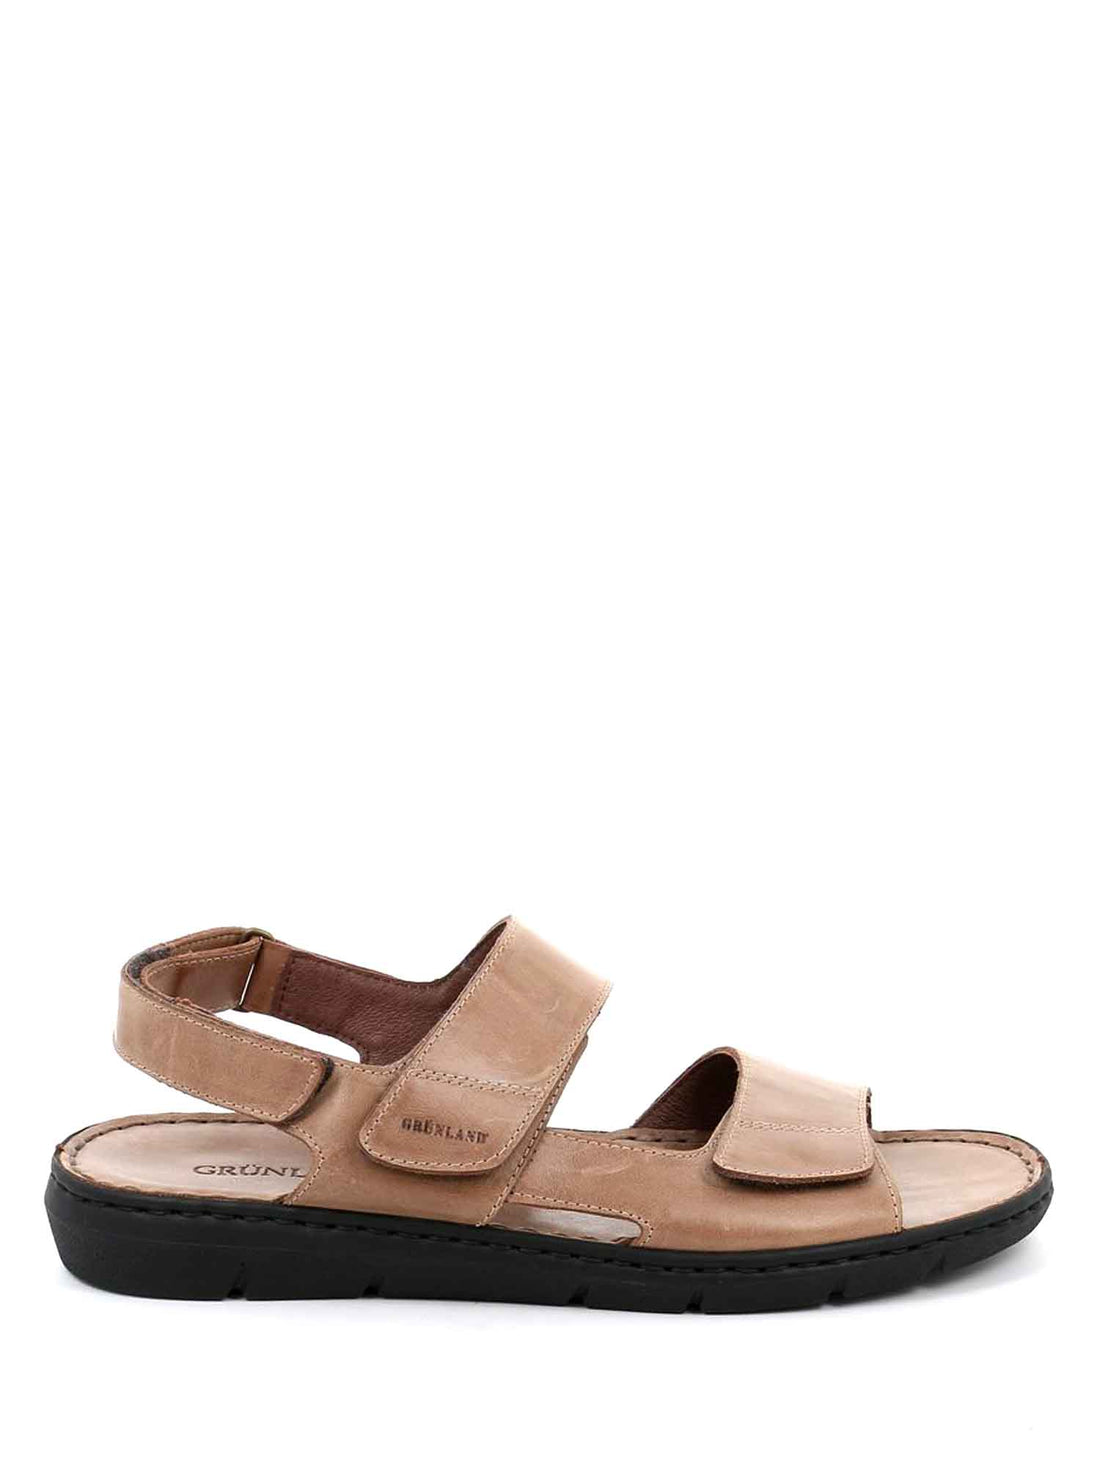 Grunland Sandals With Straps SA1241